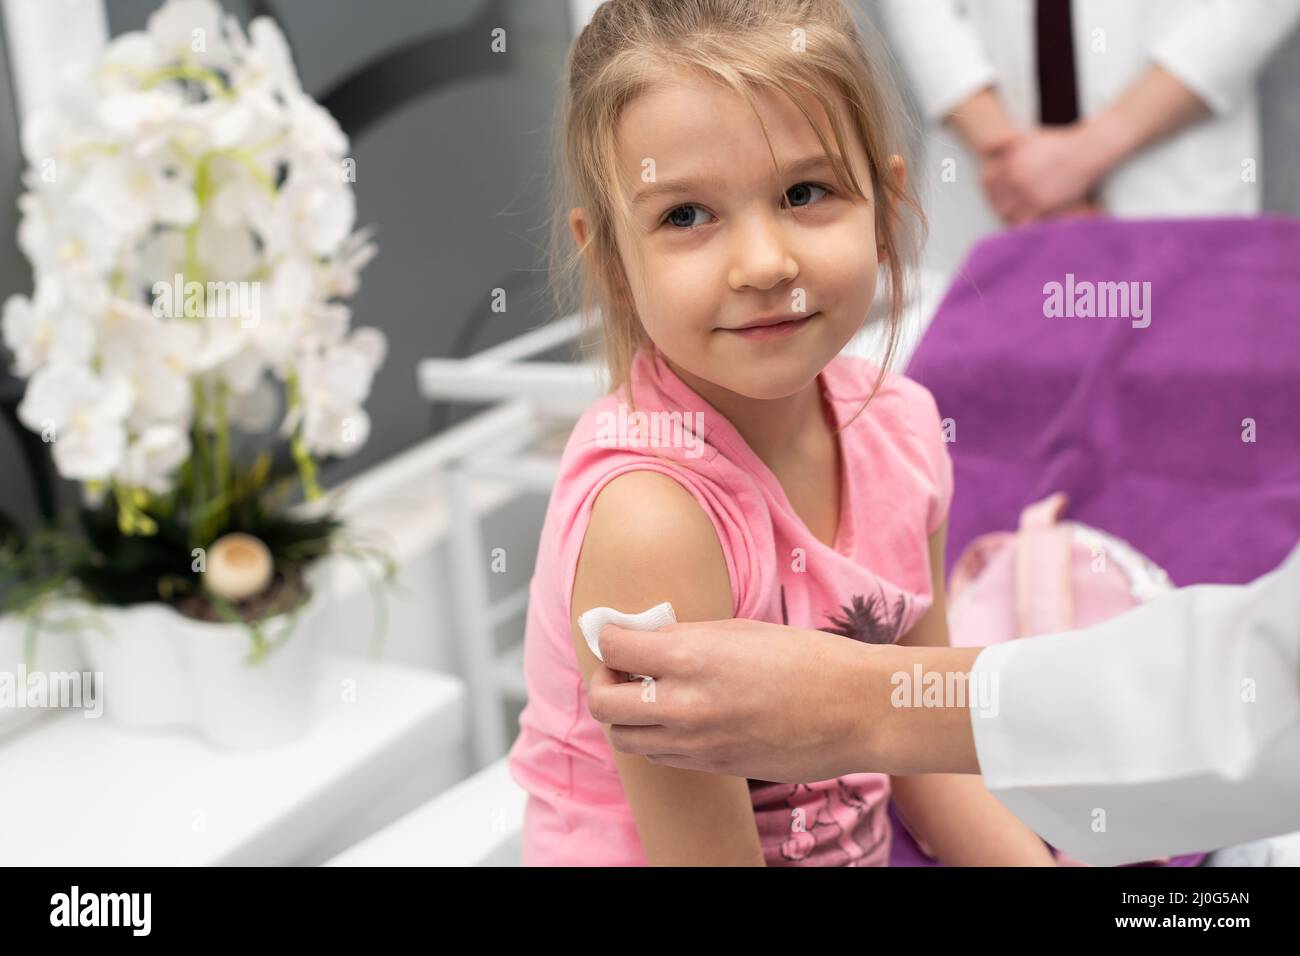 The girl is looking outside the frame. A young lady doctor is preparing a child for an injection by disinfecting a piece of skin Stock Photo